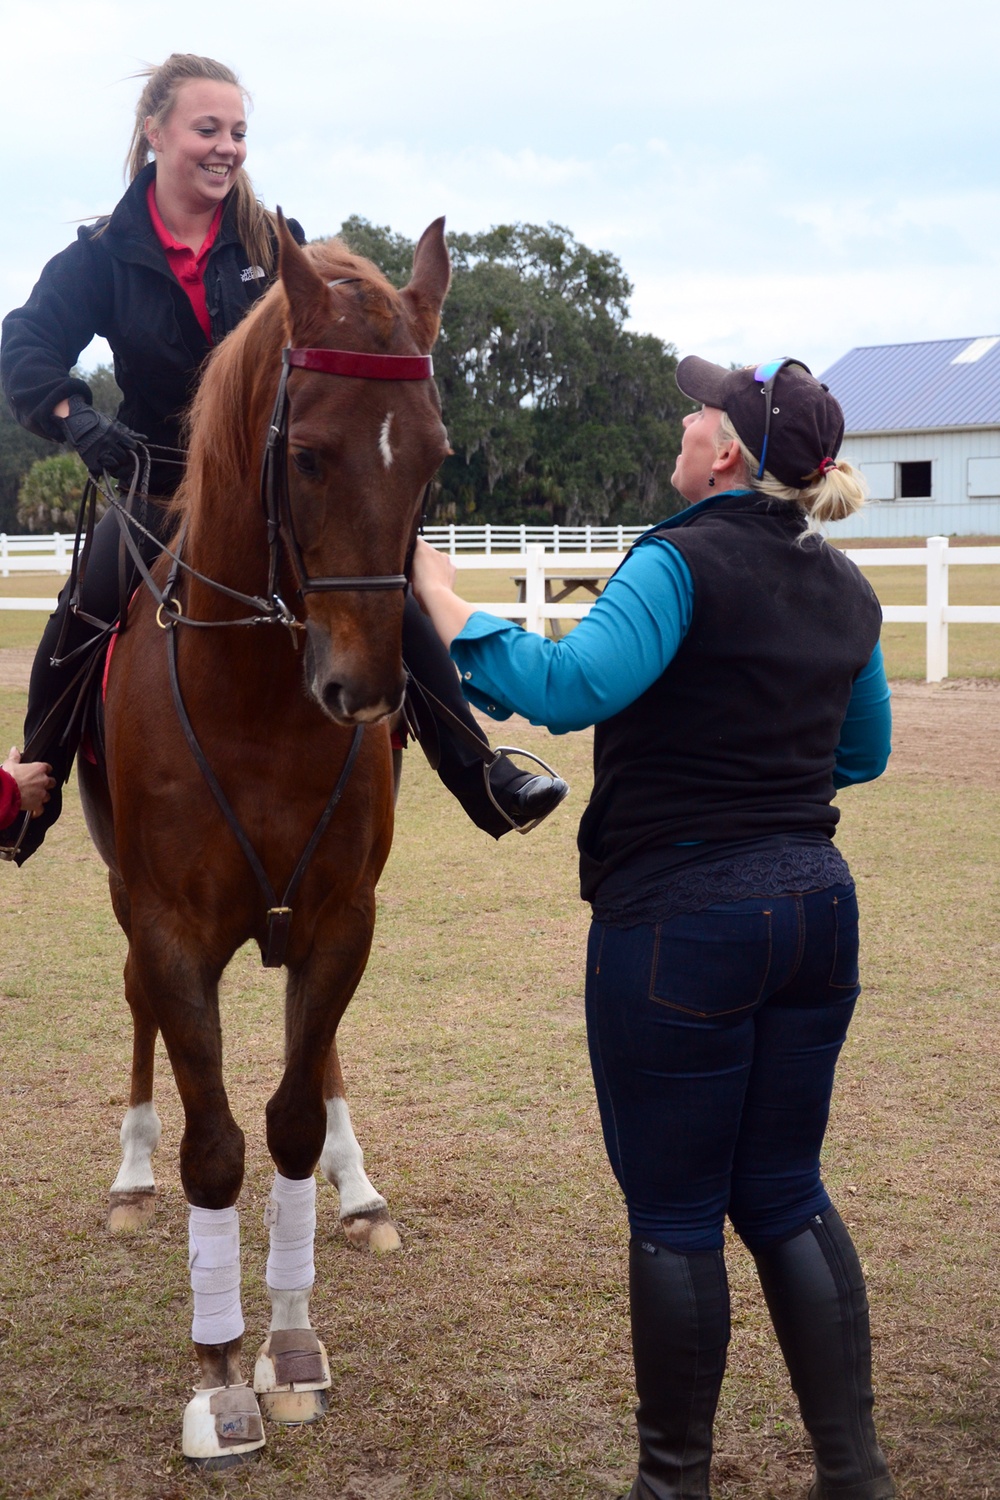 Horse trainer and Army wife: one woman's perfect balance